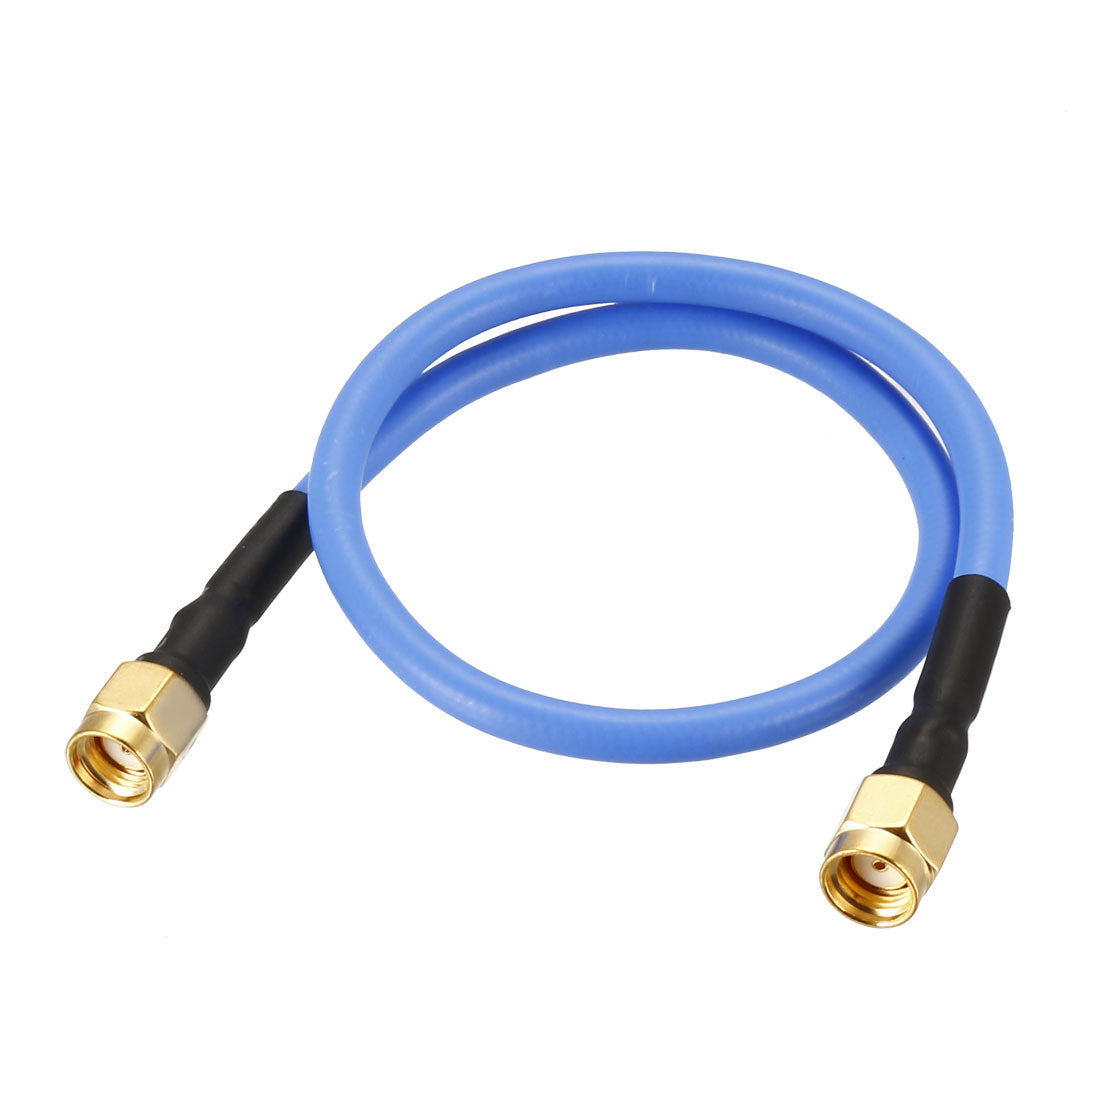 uxcell Uxcell RP-SMA Male to RP-SMA Male RG402 RF Coaxial Coax Cable 0.3Meter/1Ft